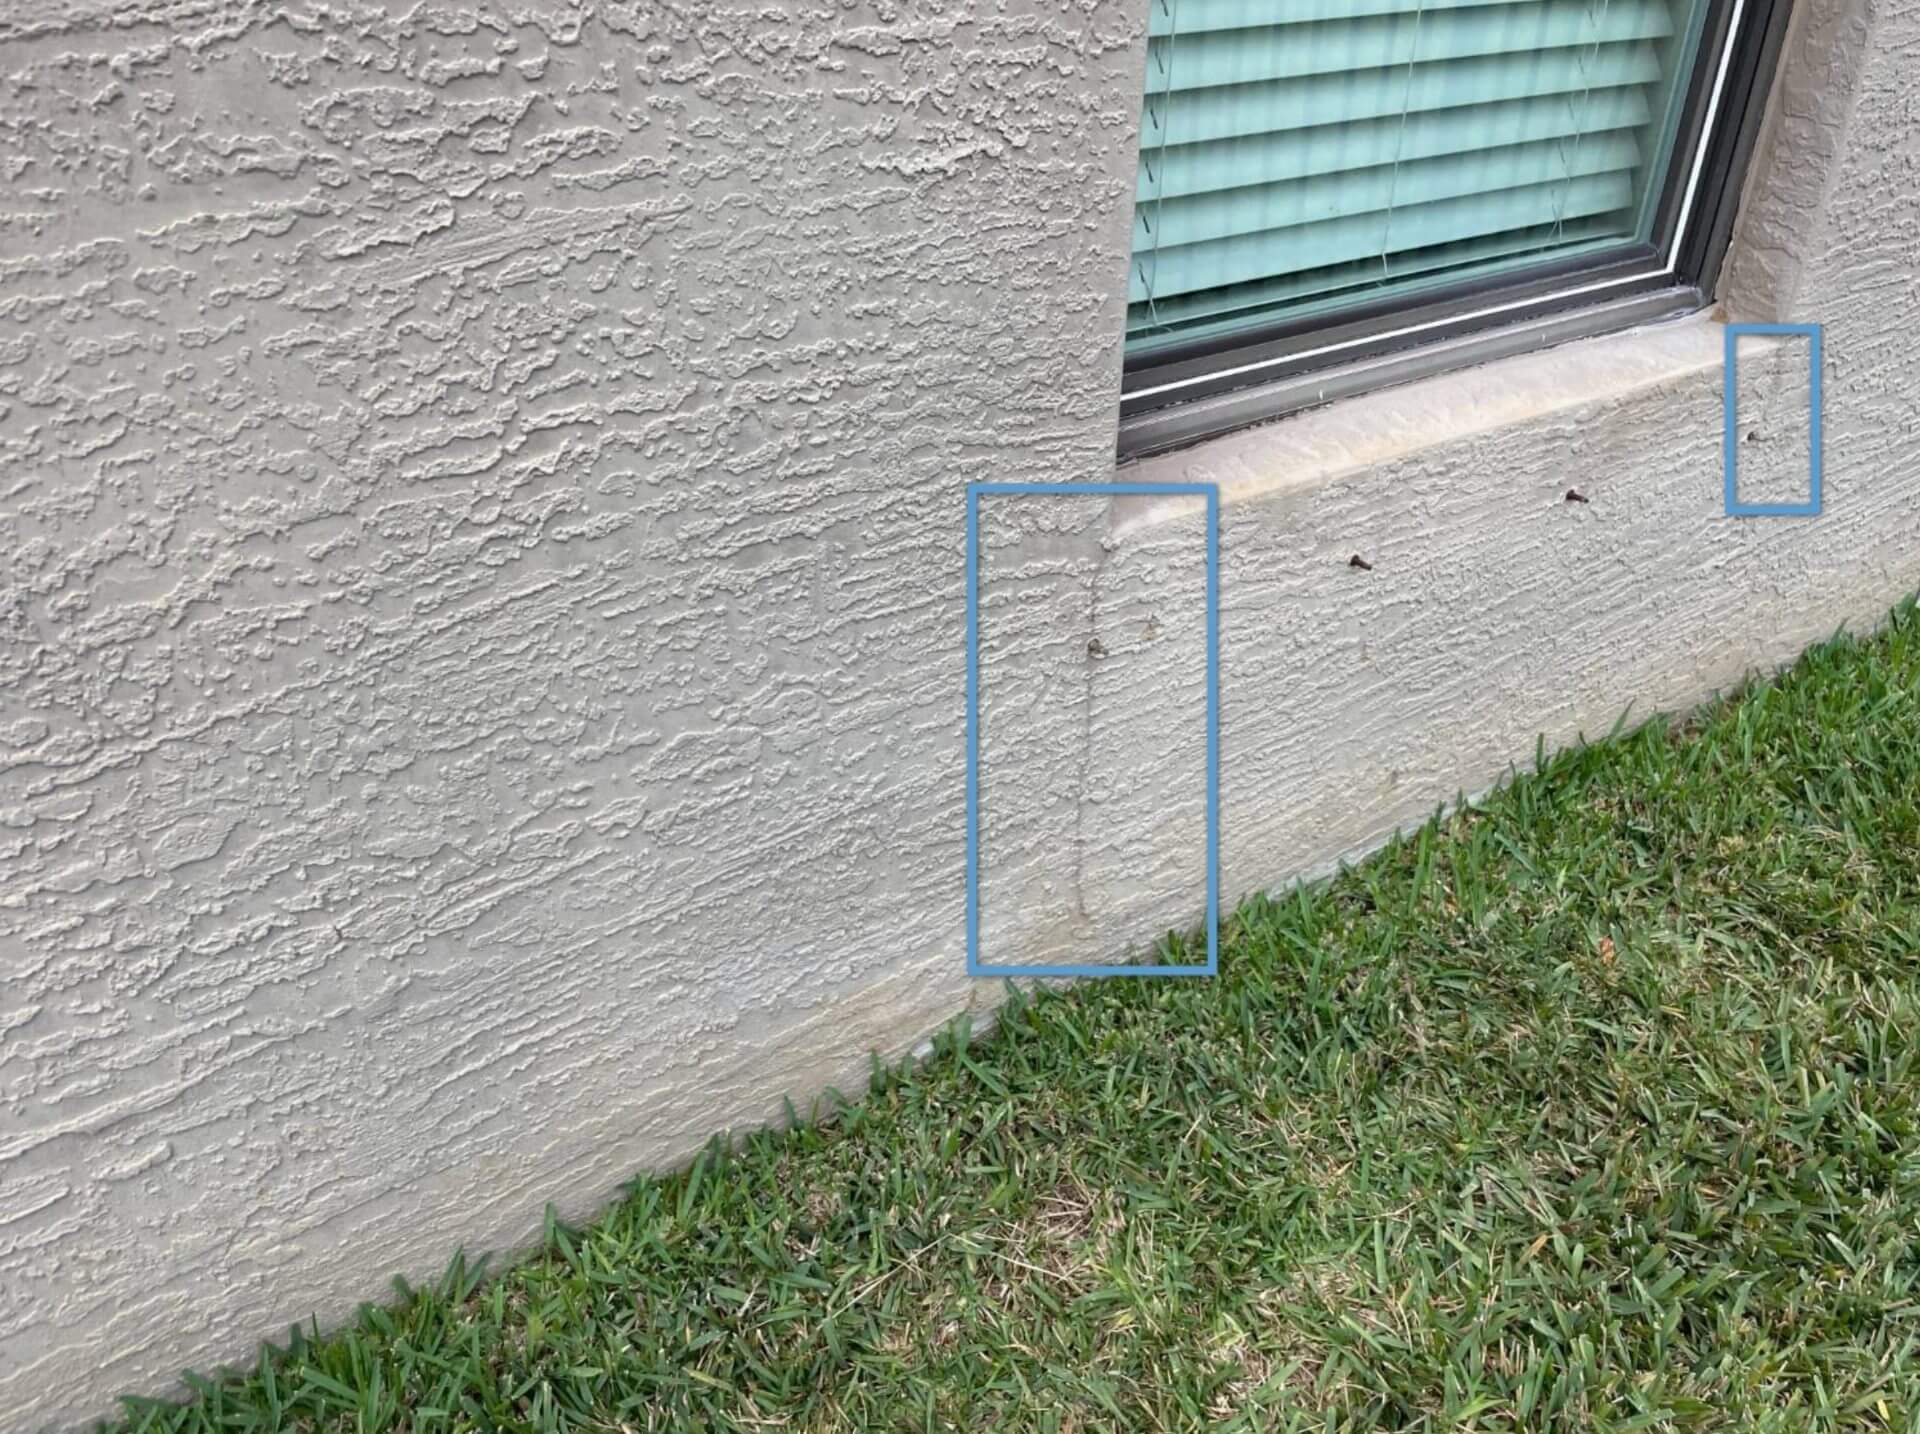 Cracked stucco on exterior of home with boxes pointing out where the cracks are